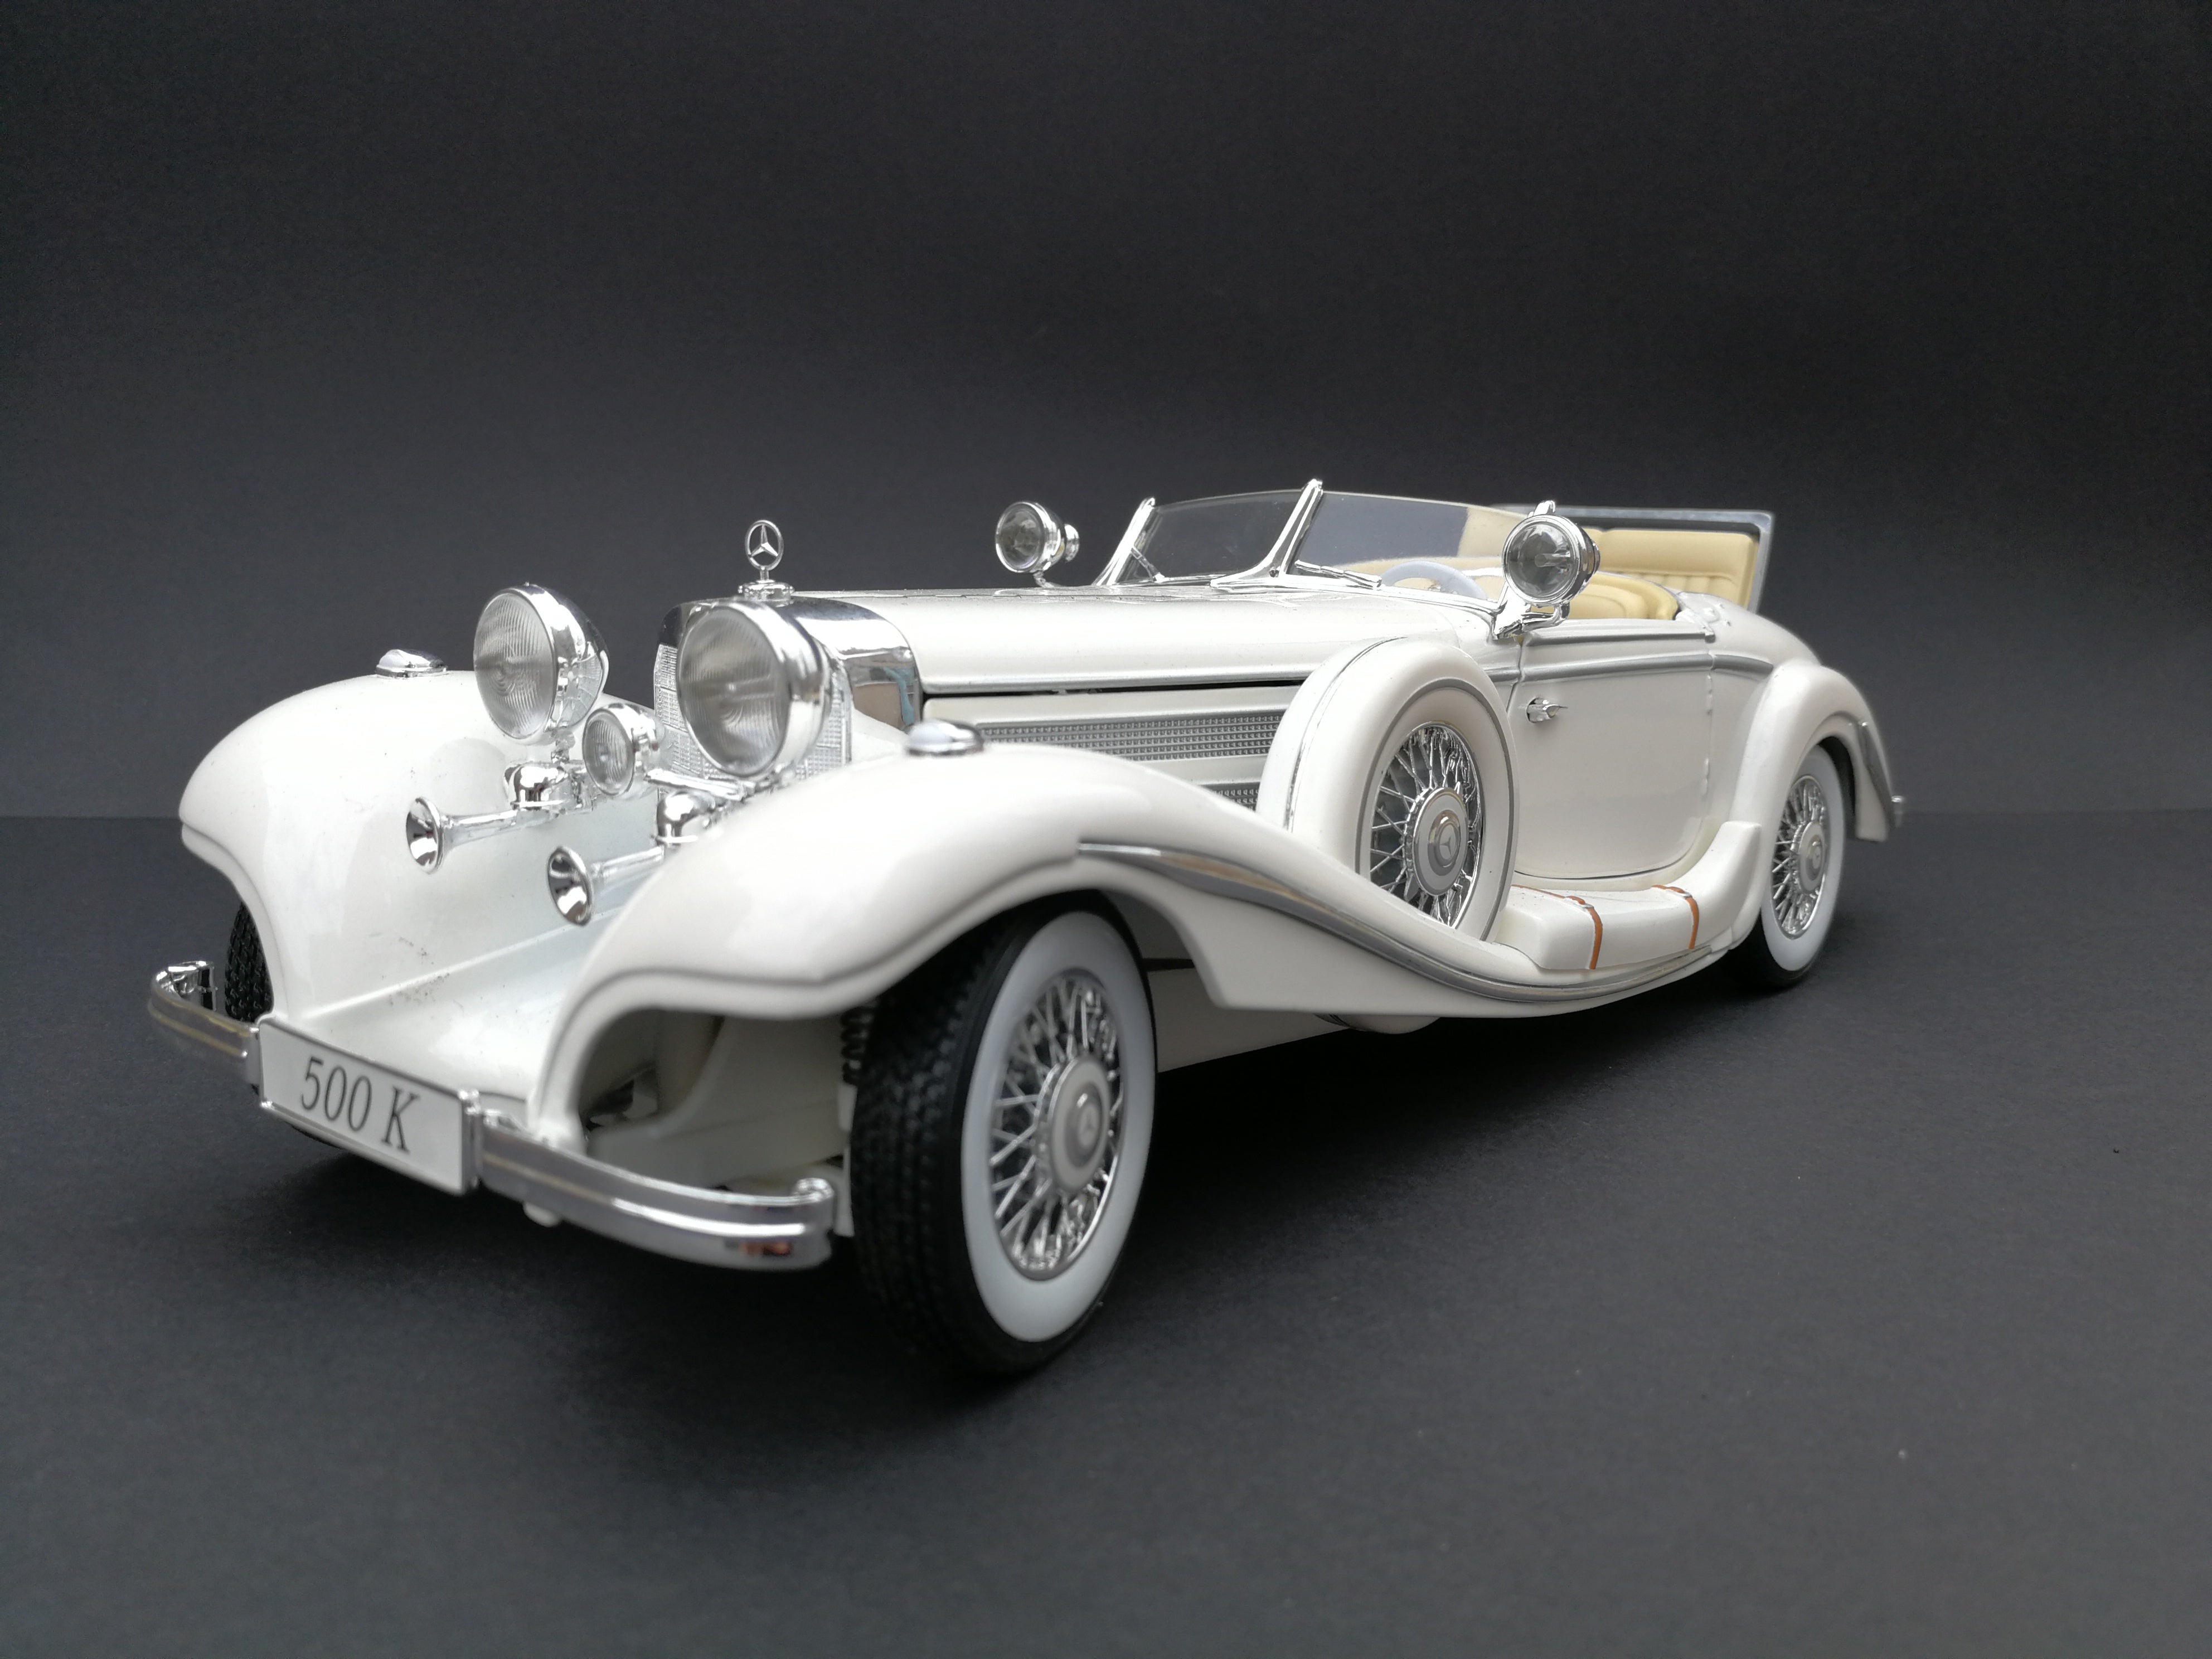 1936 Mercedez Benz 500K special roadster Diercast car. Scale: 1/18. White. 45 degree view.